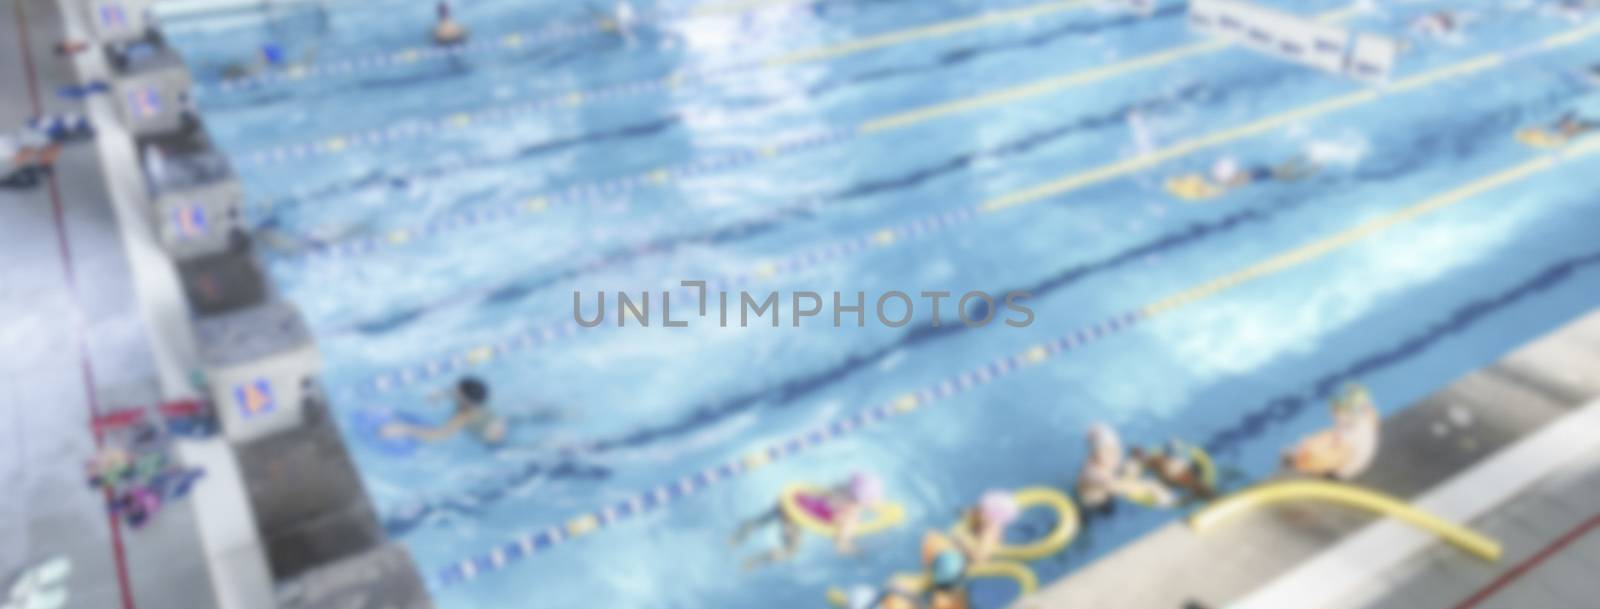 Defocused background with aerial view of a swimming pool indoor. Intentionally blurred post production for bokeh effect